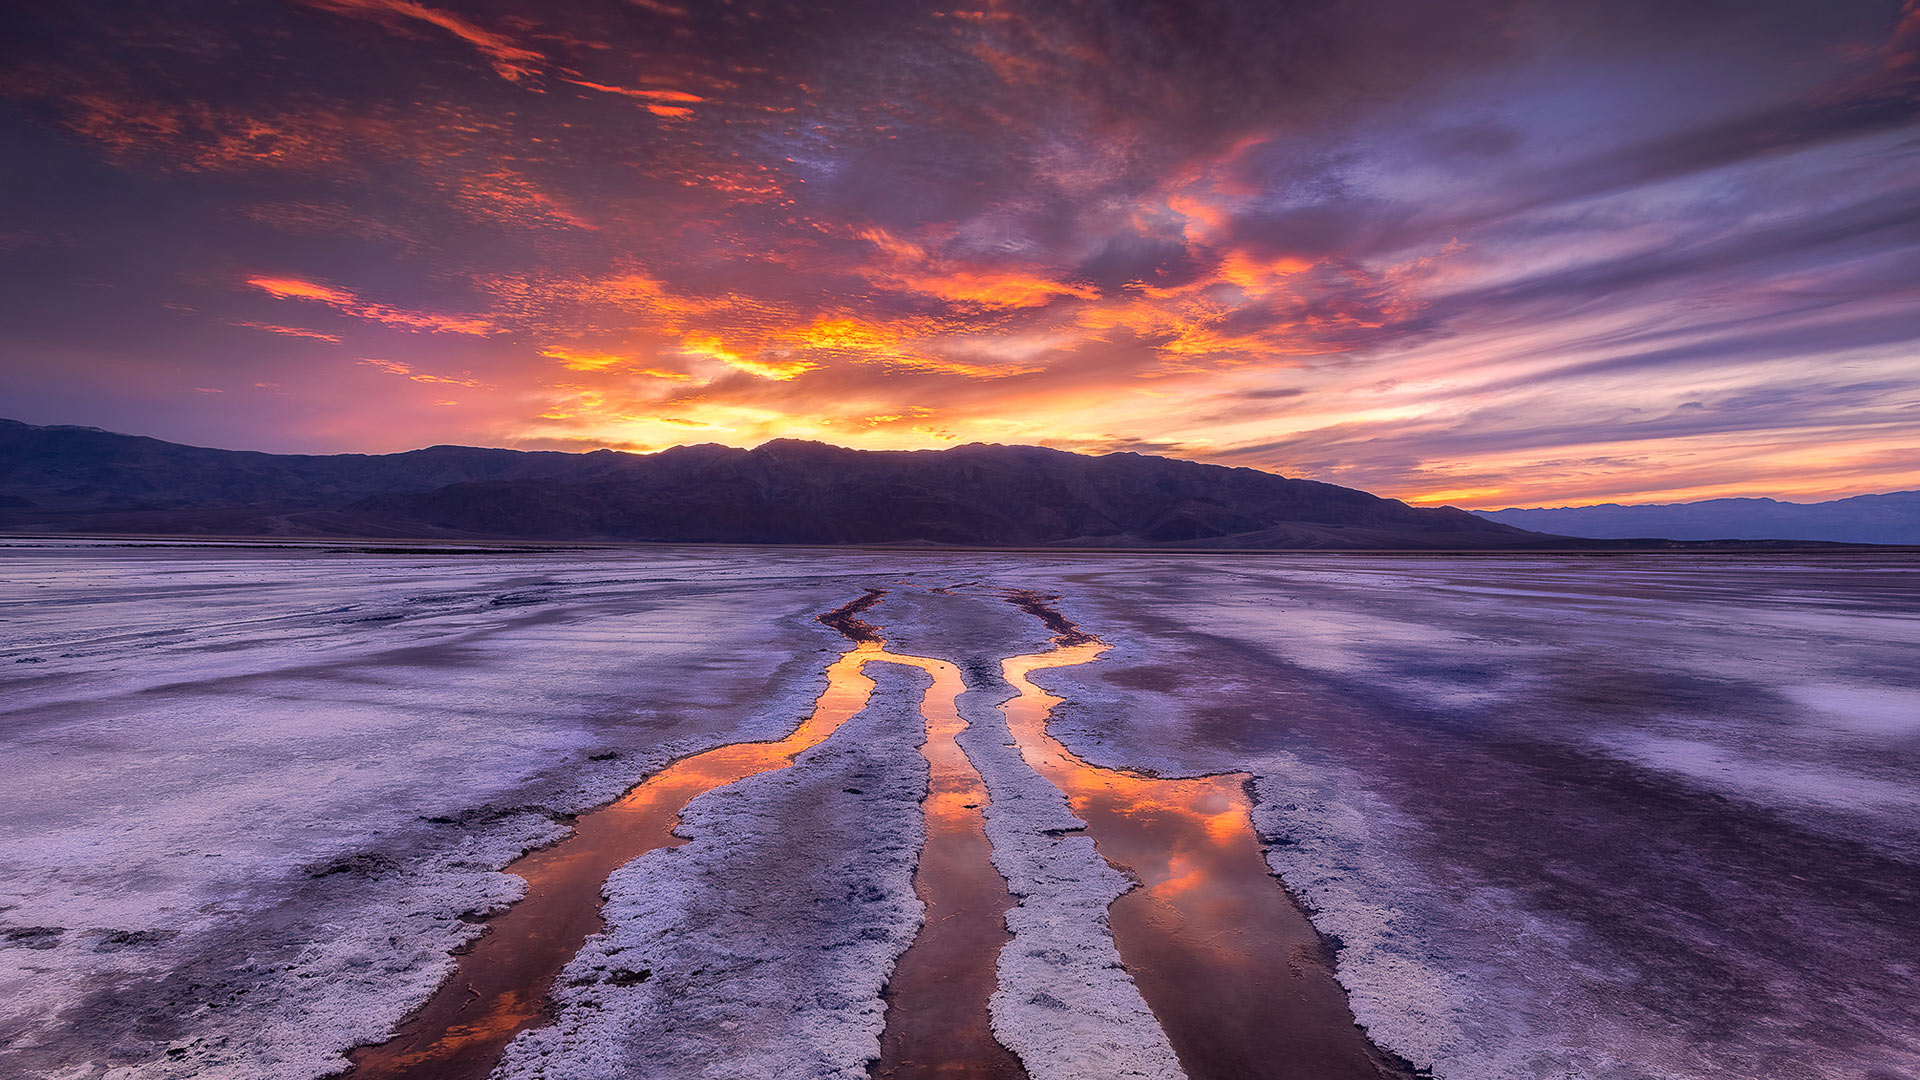 General 1920x1080 nature landscape sky clouds mountains sunset Death Valley California USA water reflection